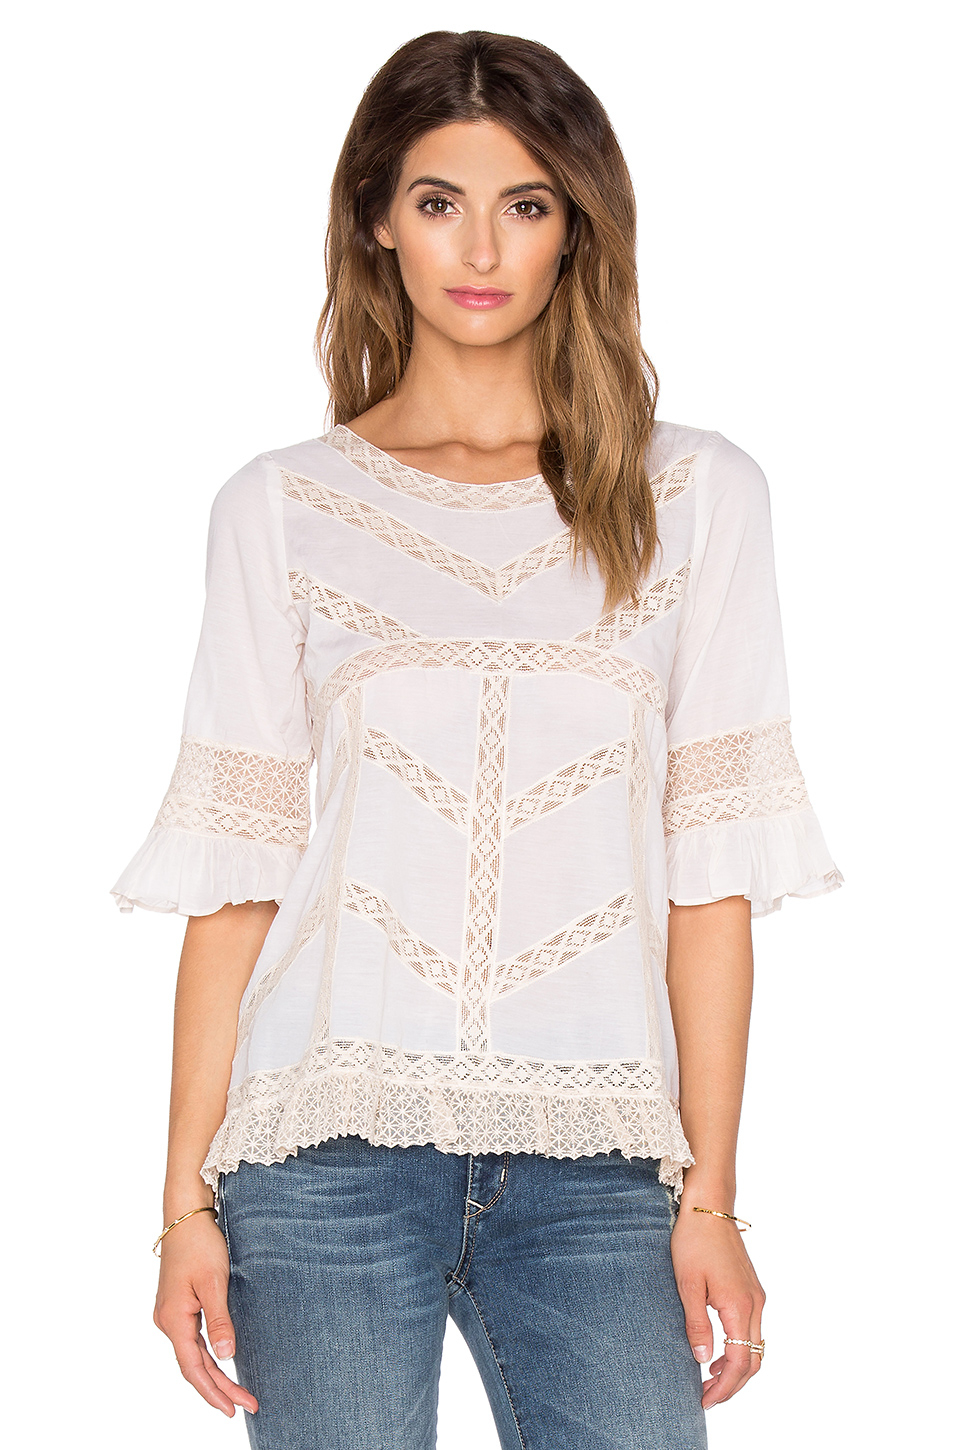 Lyst - Love Sam Lace Inserts Top in Natural